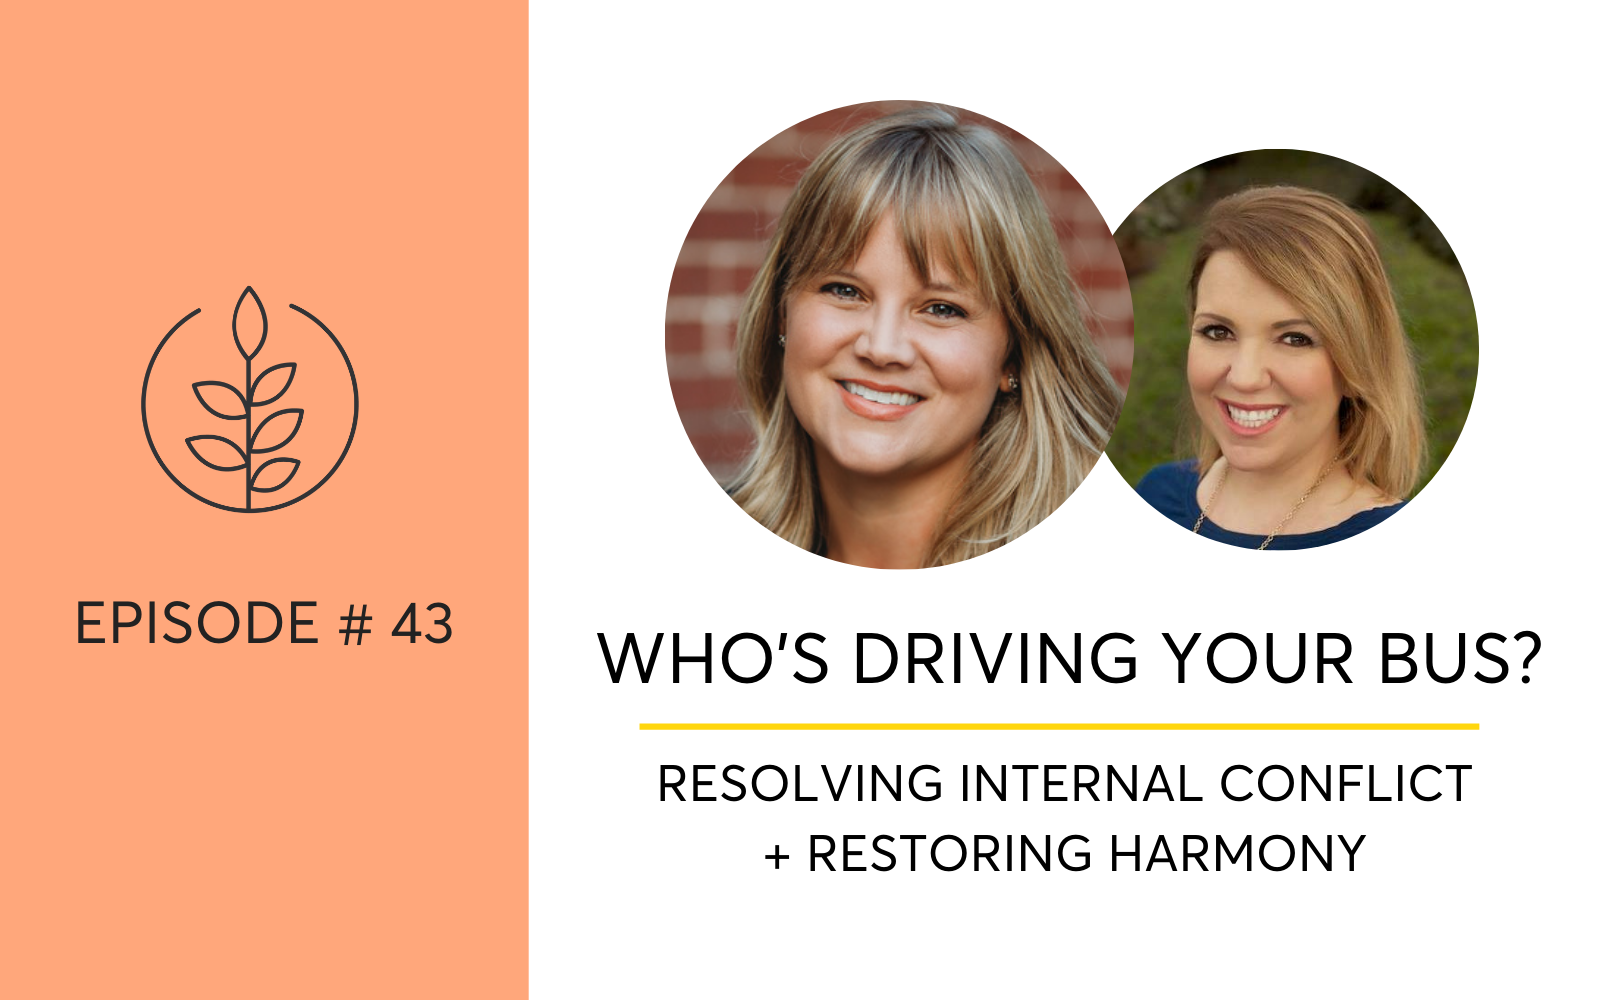 Resolving Internal Conflict and Restoring Harmony